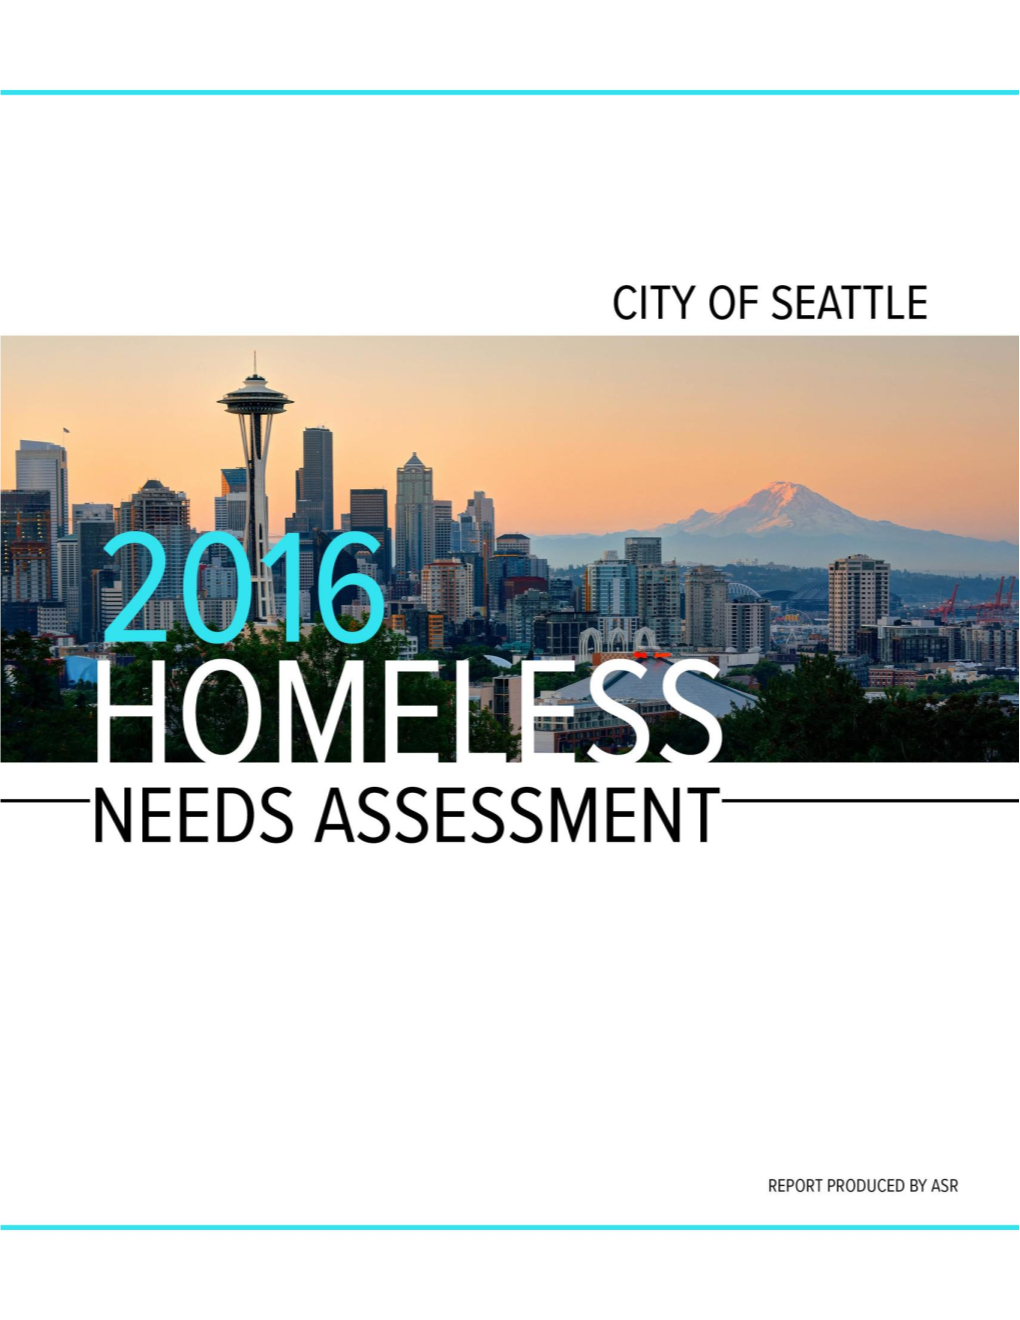 Propos2016 City of Seattle Homeless Needs Assessmenscope of Services